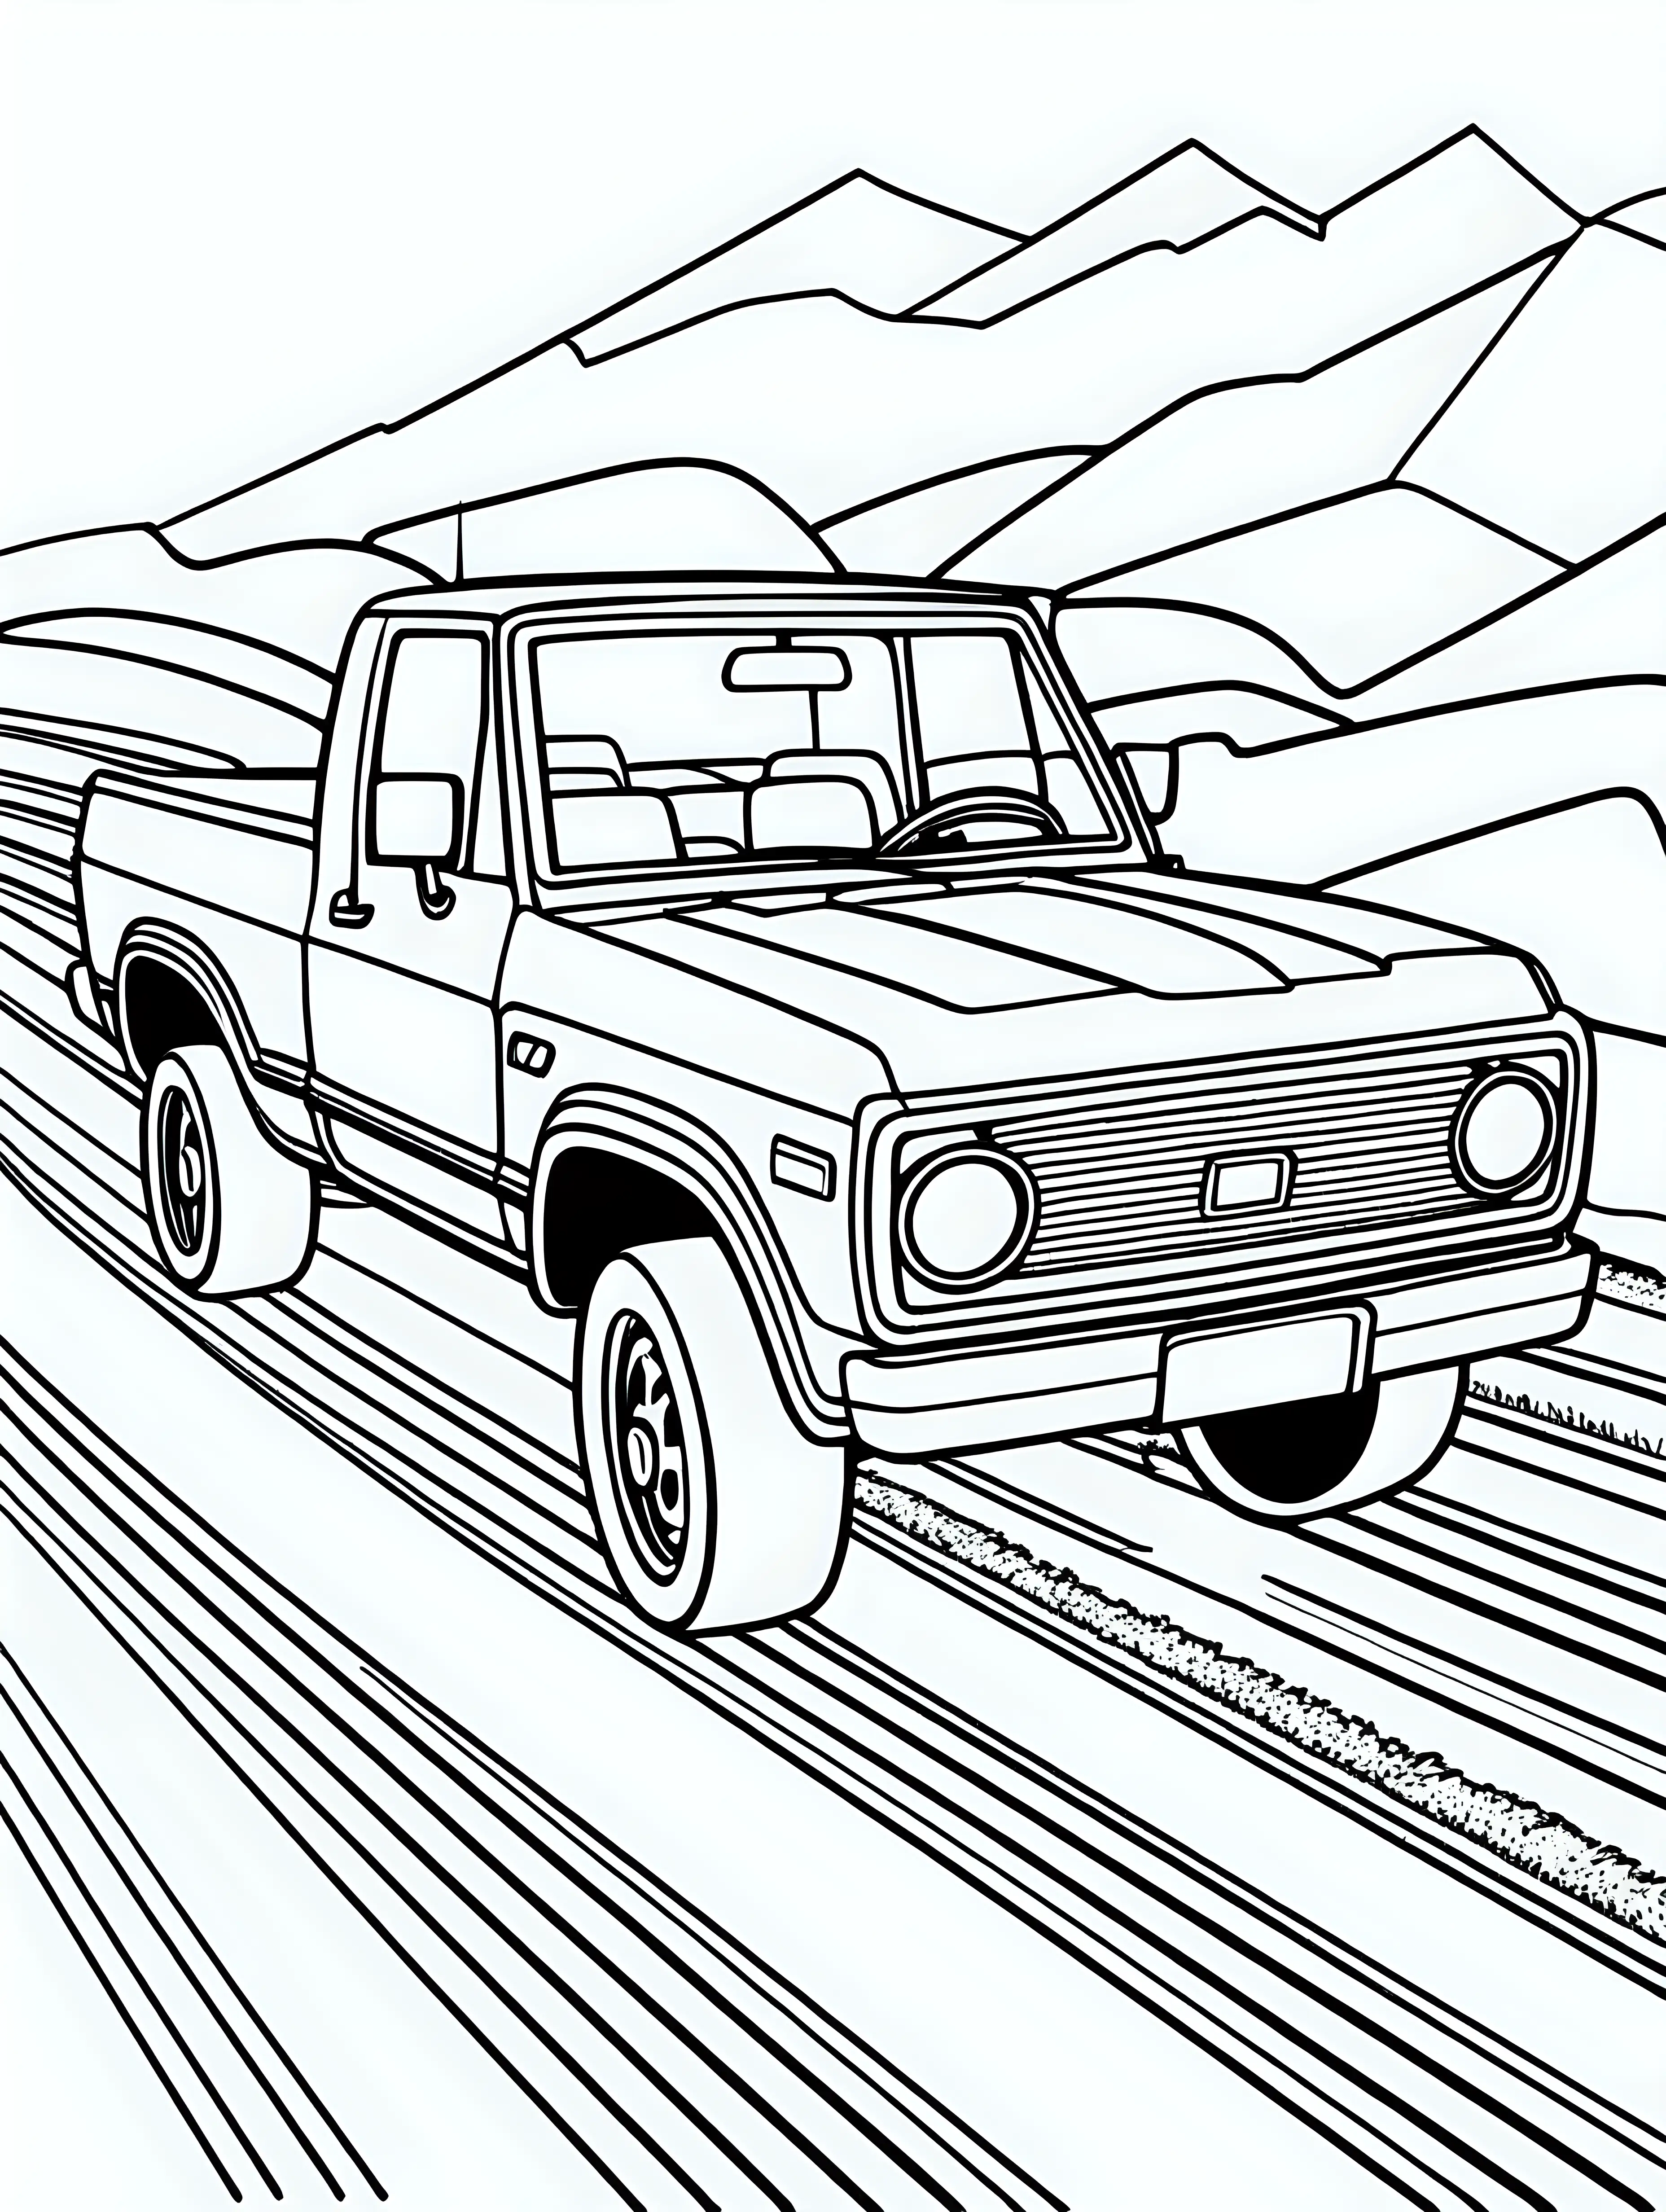 Coloring page for kids, pick up car, the car is on a car track, black lines white background 